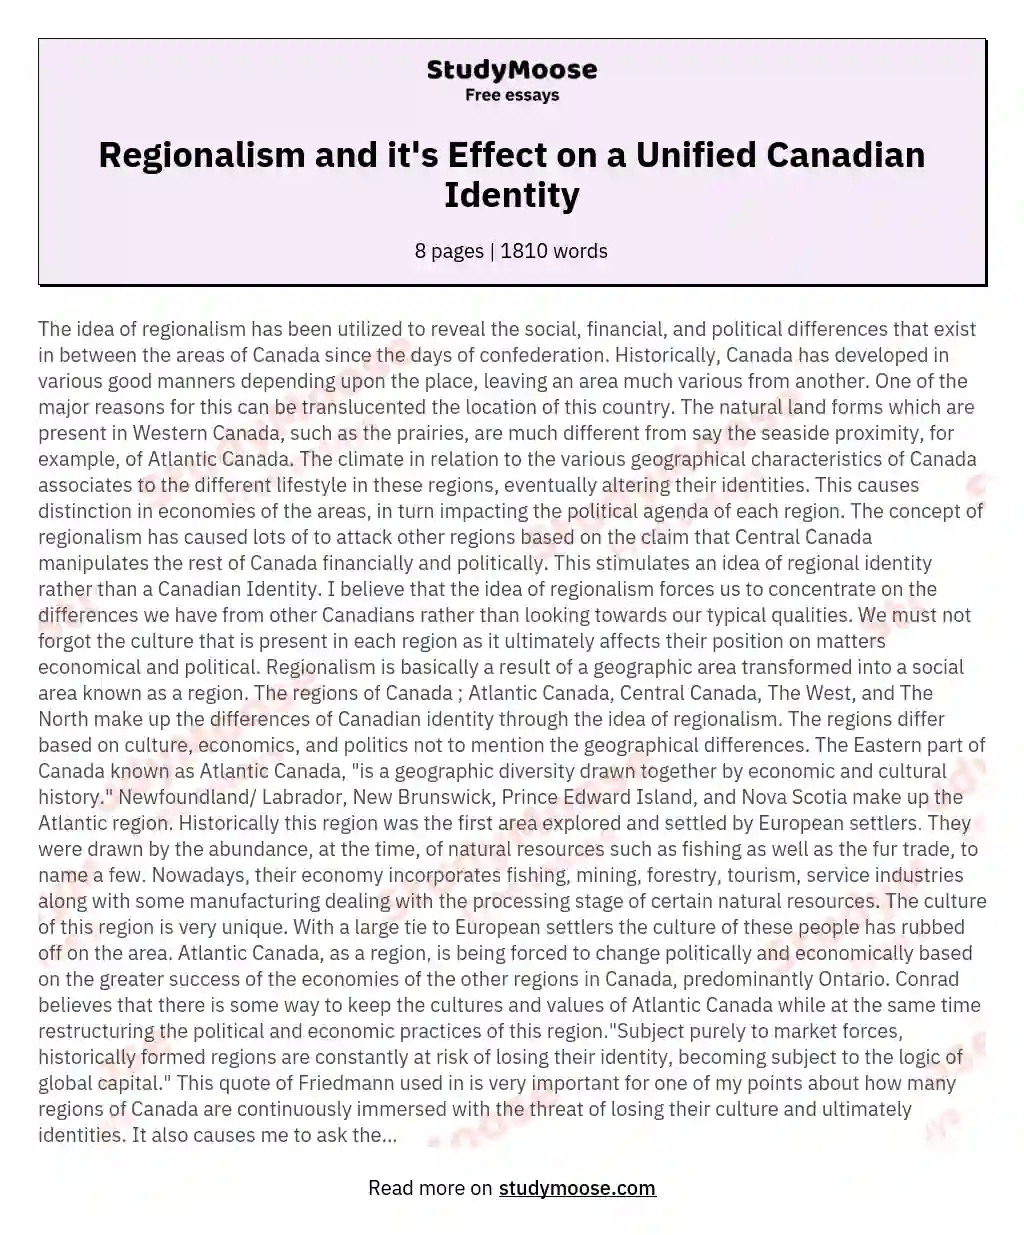 Regionalism and it's Effect on a Unified Canadian Identity essay